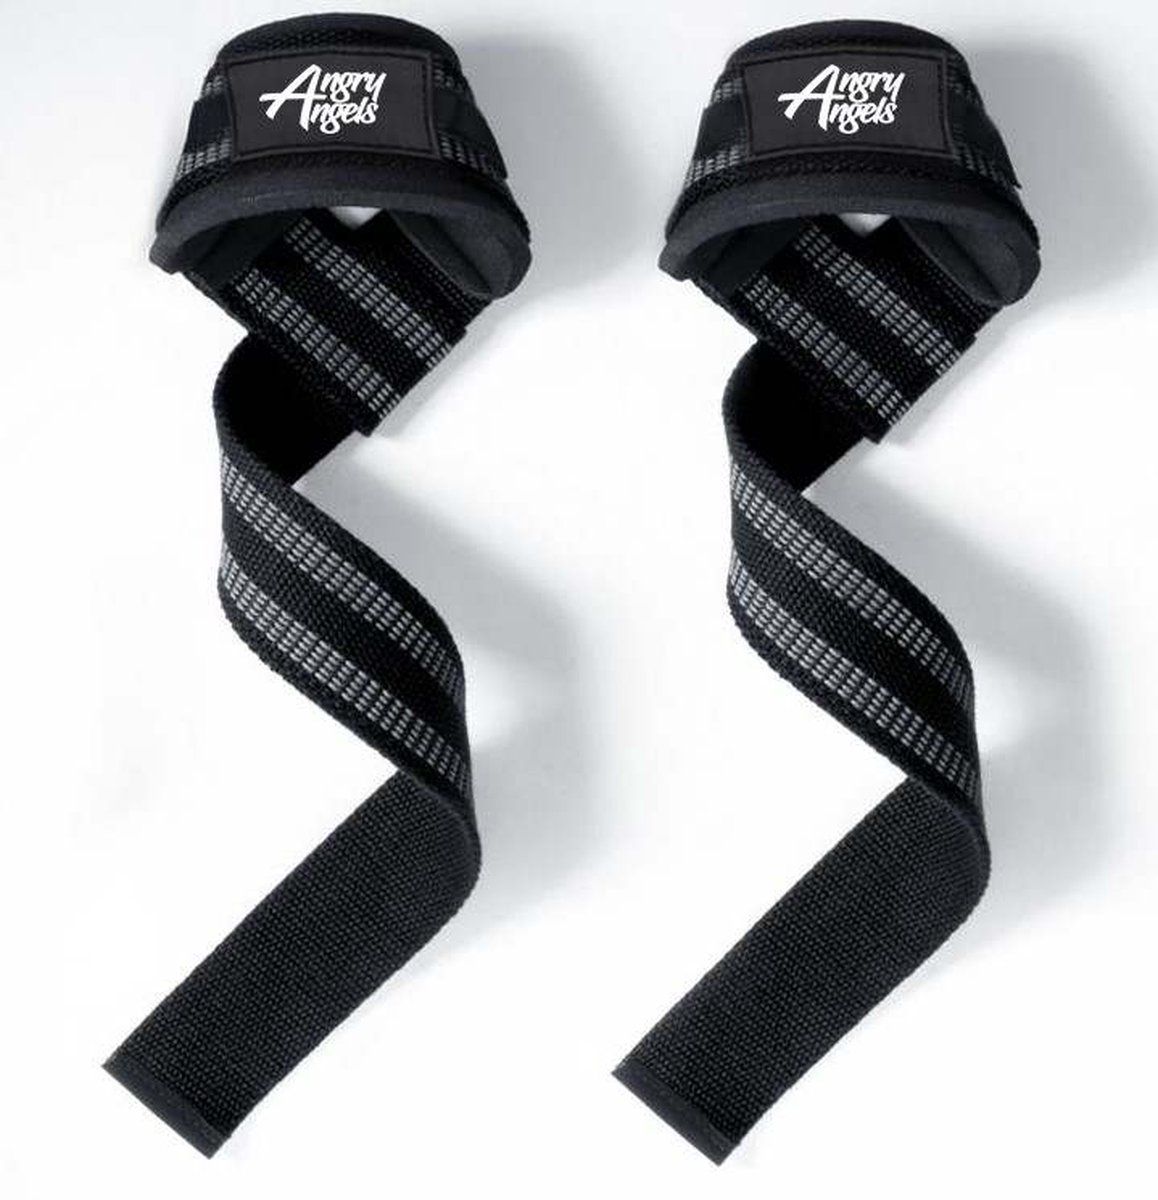 ANGRY ANGELS LIFESTYLE® Lifting Straps voor Fitness, Crossfit, Bodybuilding, Powerlifting, Weightlifting - Zwart